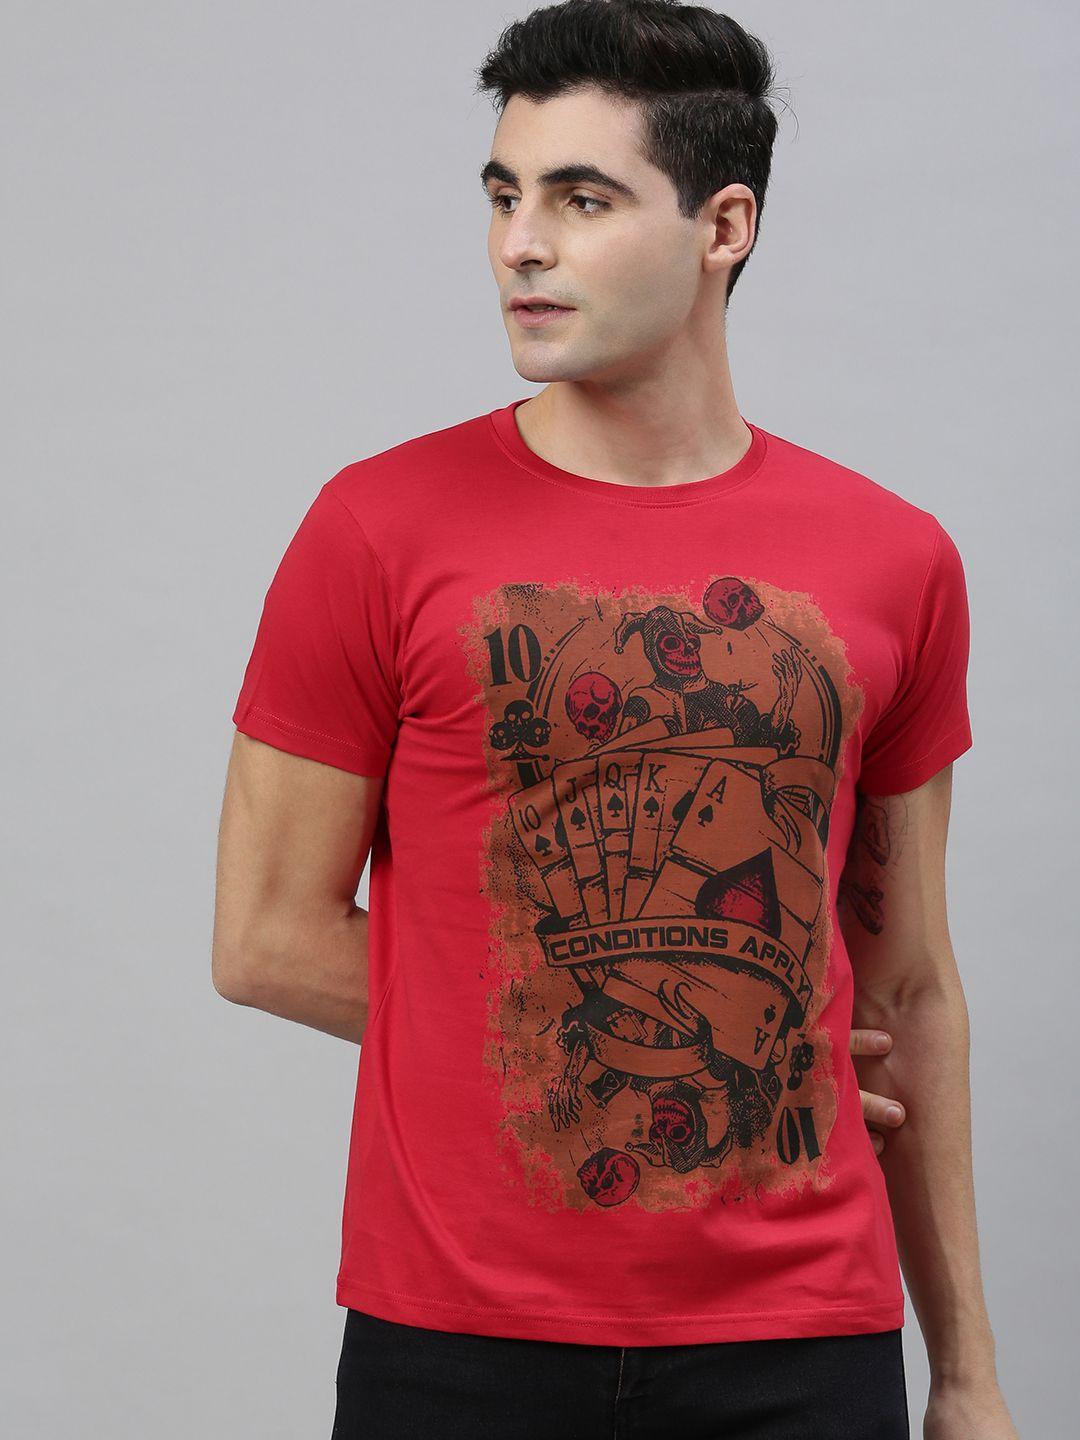 conditions-apply-men-red-printed-round-neck-pure-cotton-t-shirt